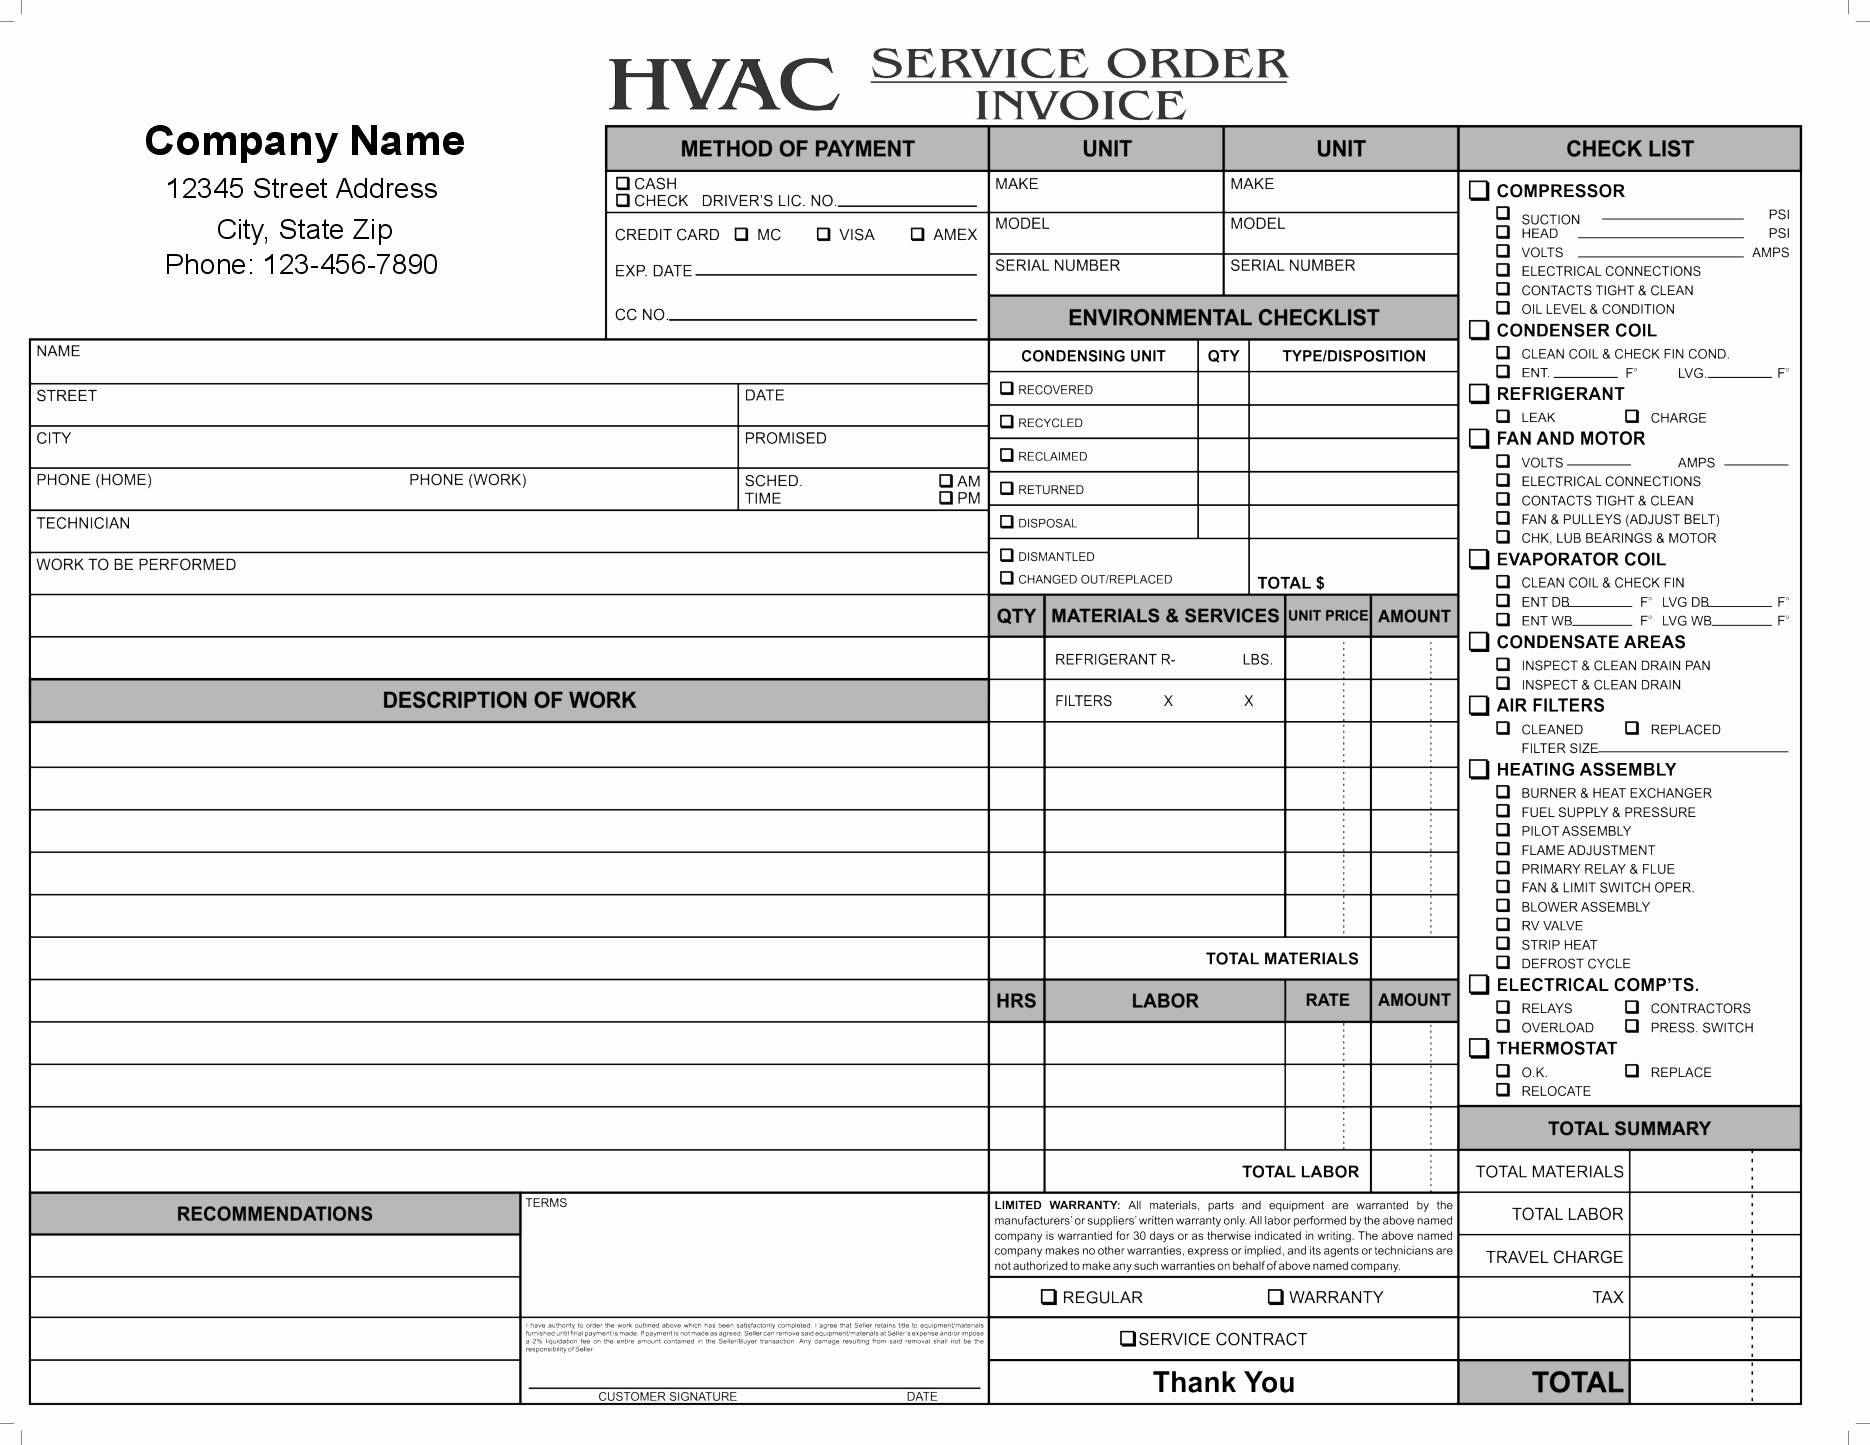 Hvac Service Agreement Hvac Service Agreement Software Free Download Wfacca